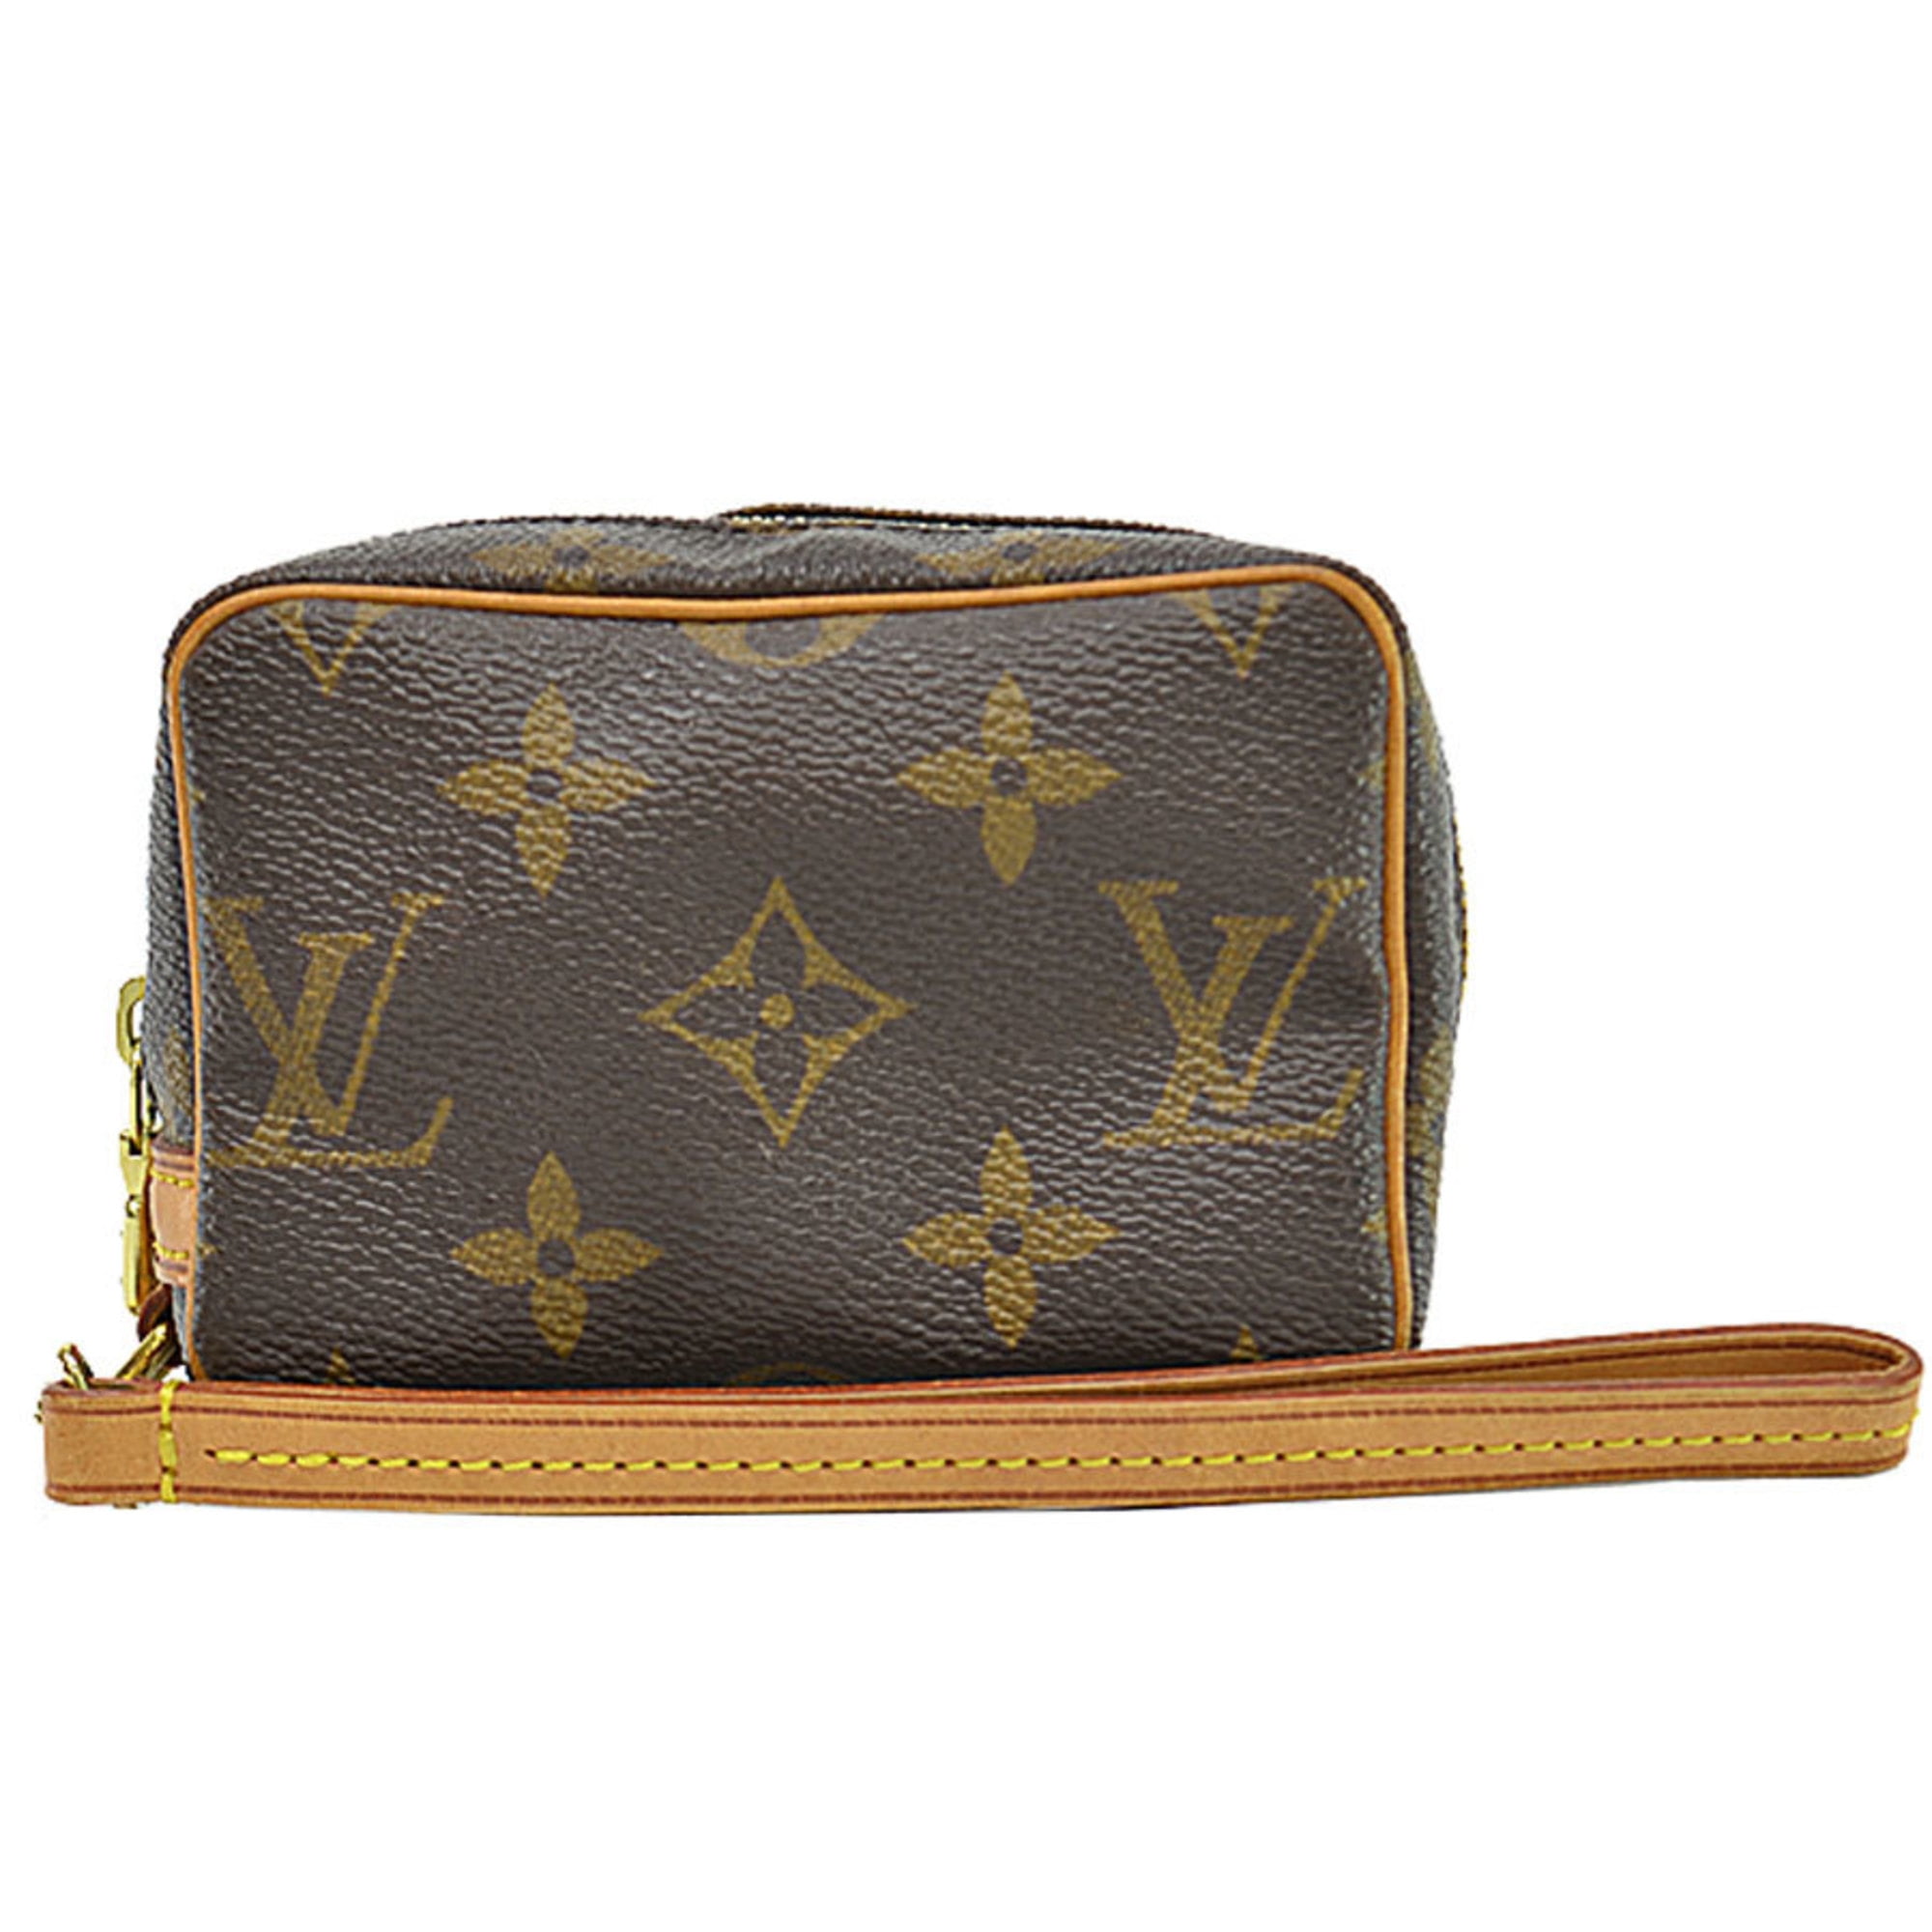 Louis Vuitton Authenticated Truth Leather Handbag